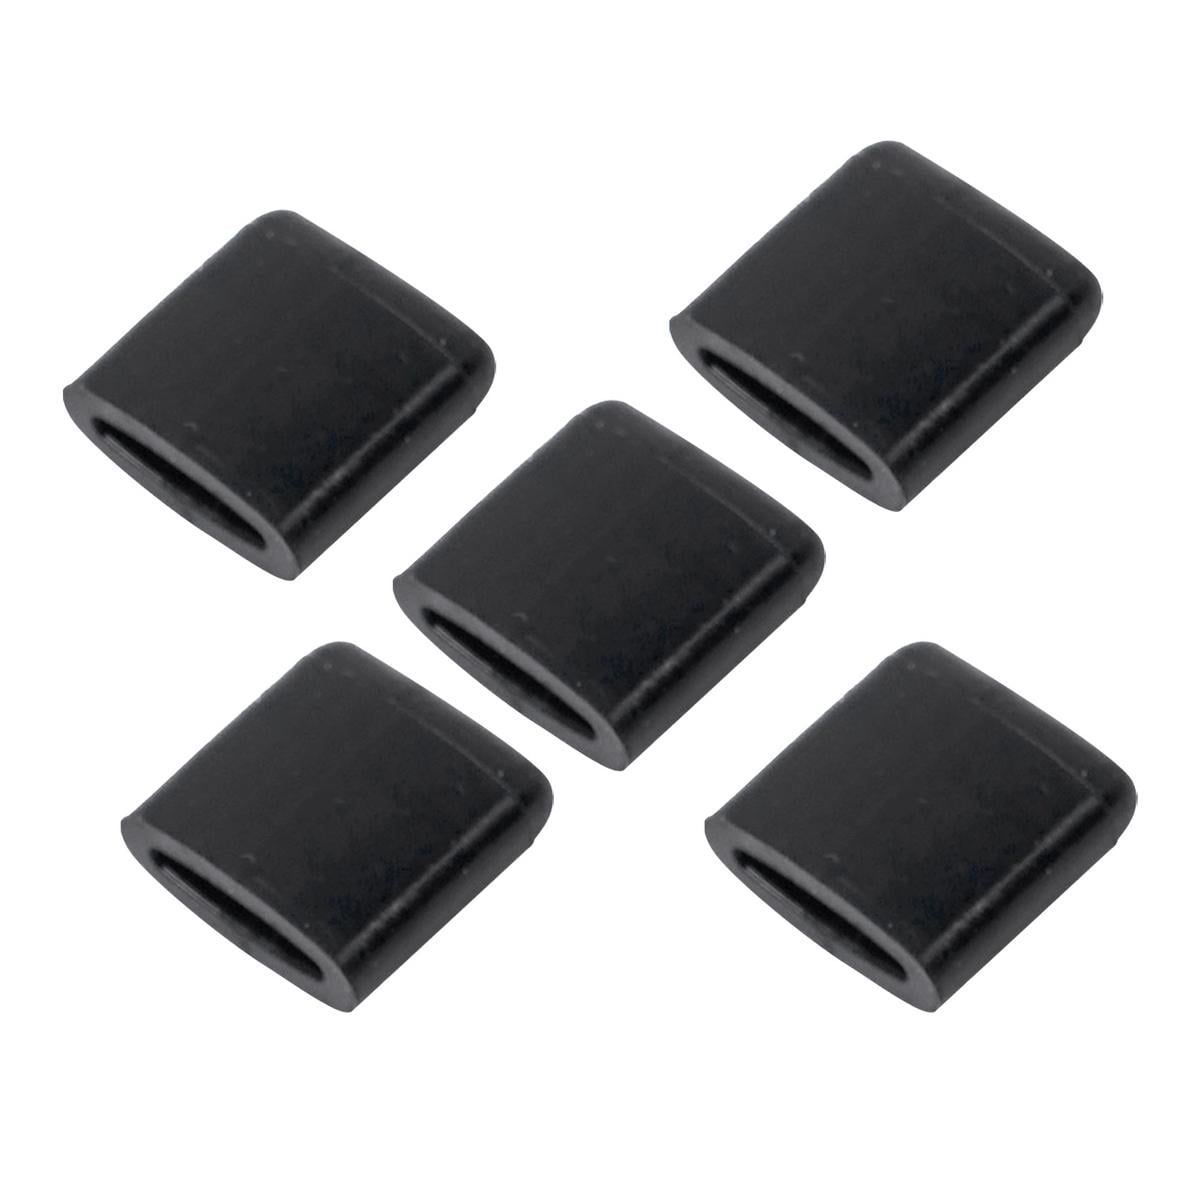 10PCS Kitchen Silicone Air Fryer Scratch Protection Cover Black Tool For Air  Fryer Grill Pan Tray Rubber Cooking Accessories - AliExpress